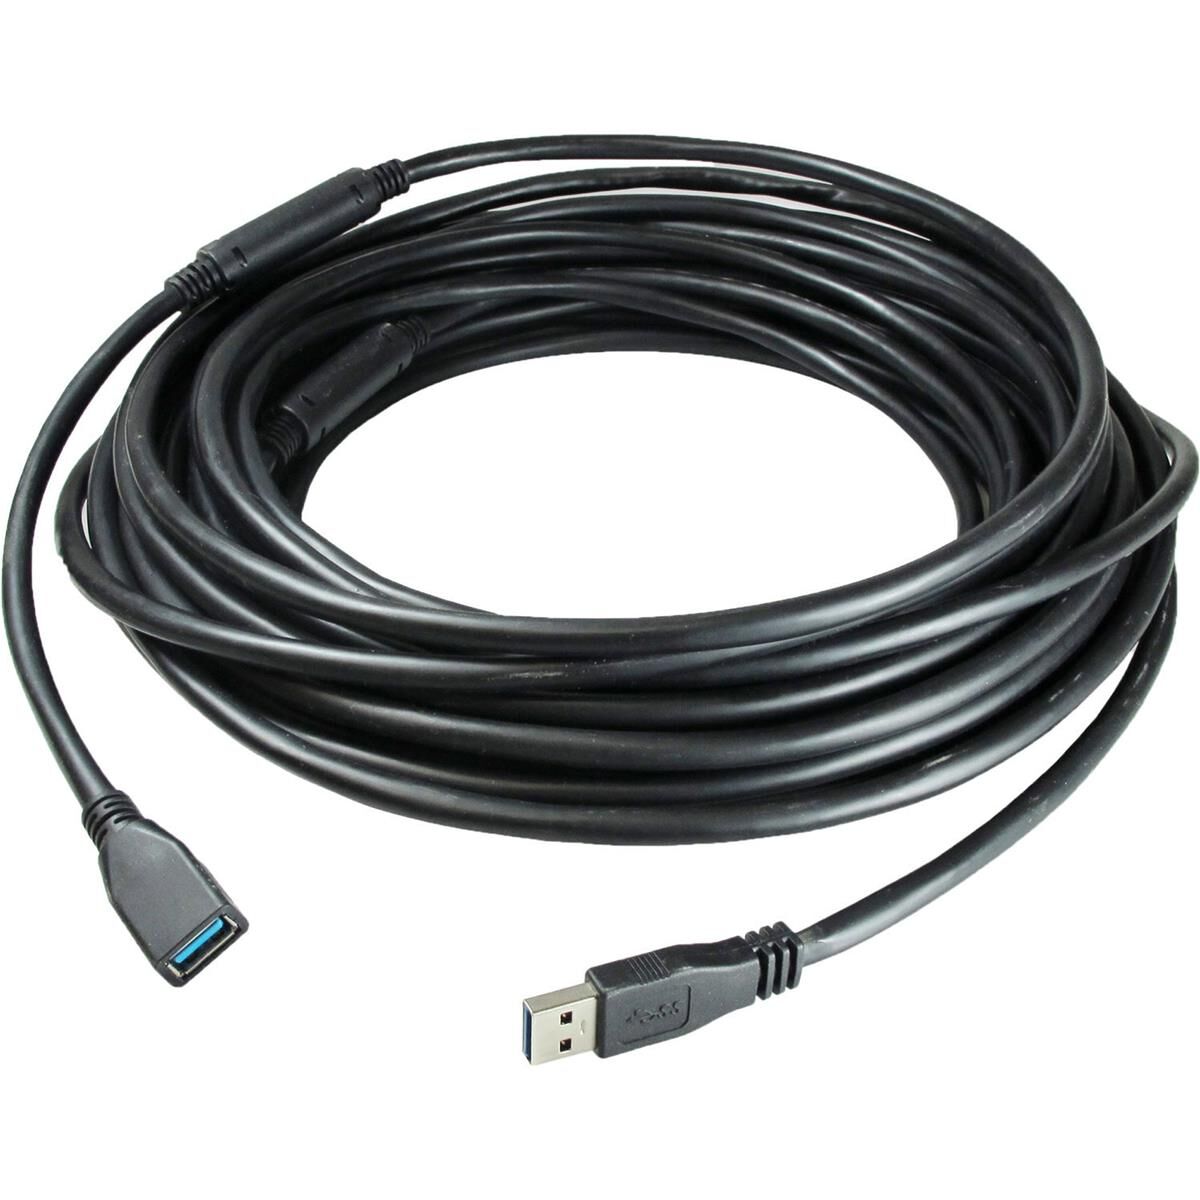 Comprehensive Pro AV/IT Plenum Active USB 3.0 Type-A Male to Female Cable, 25'